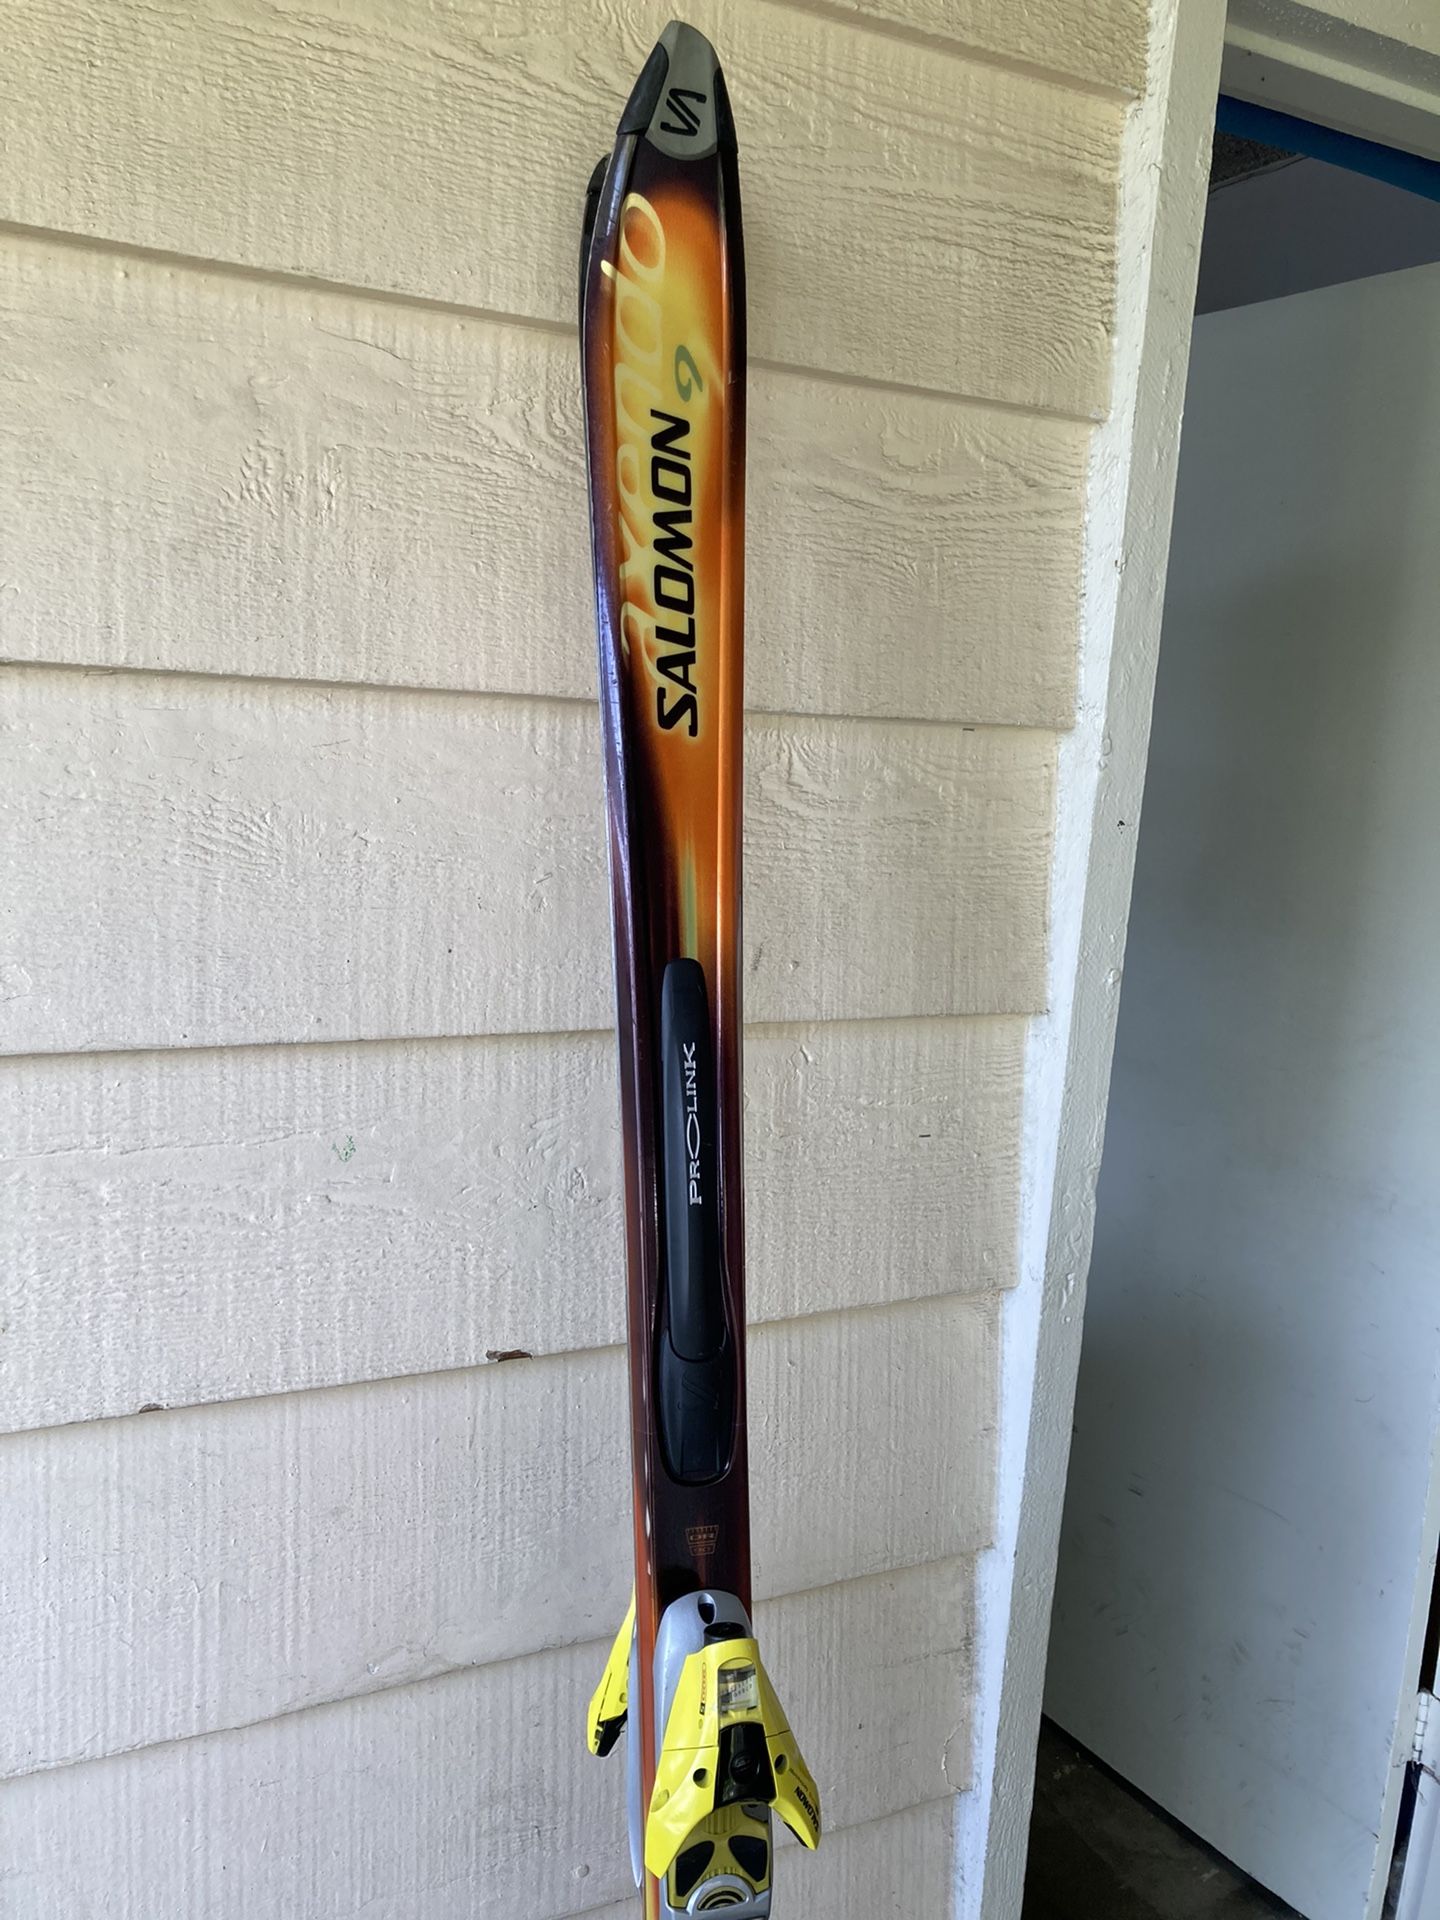 Solomon Axendo 9 Downhill Skis. Excellent Condition . Very Little Use. With Soloman 900s Bindings.  